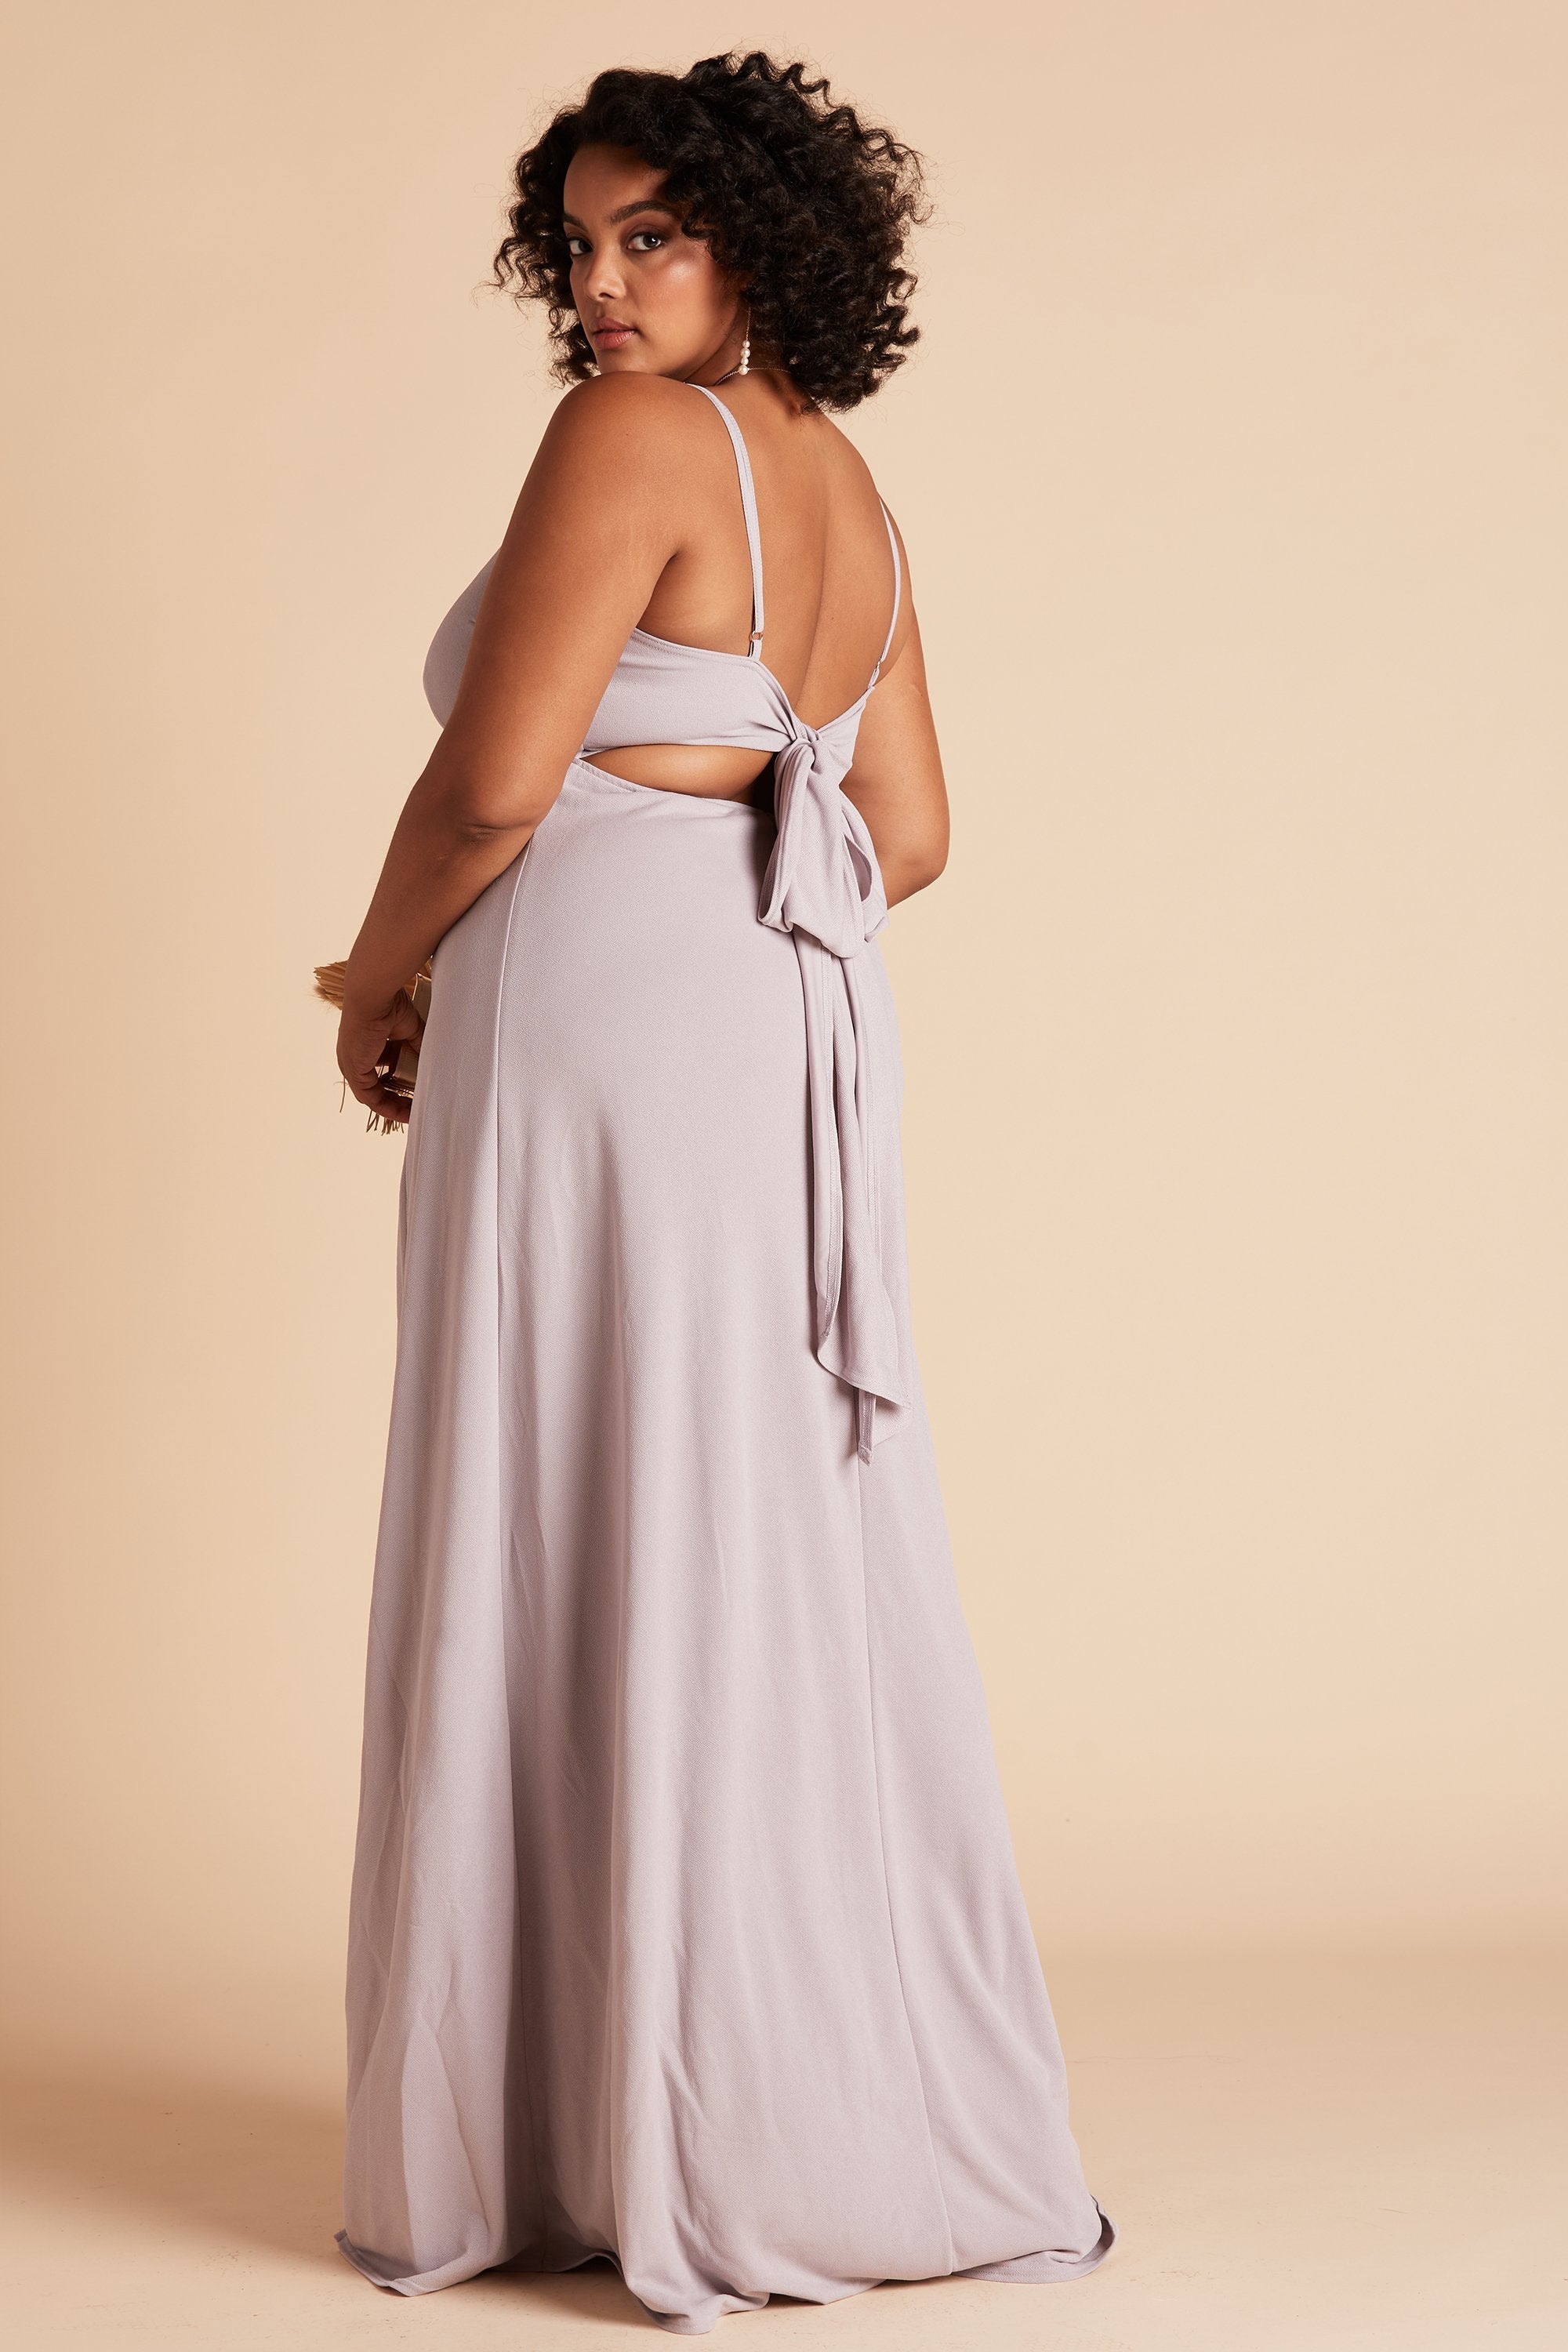 Benny plus size bridesmaid dress in lilac purple crepe by Birdy Grey, side view